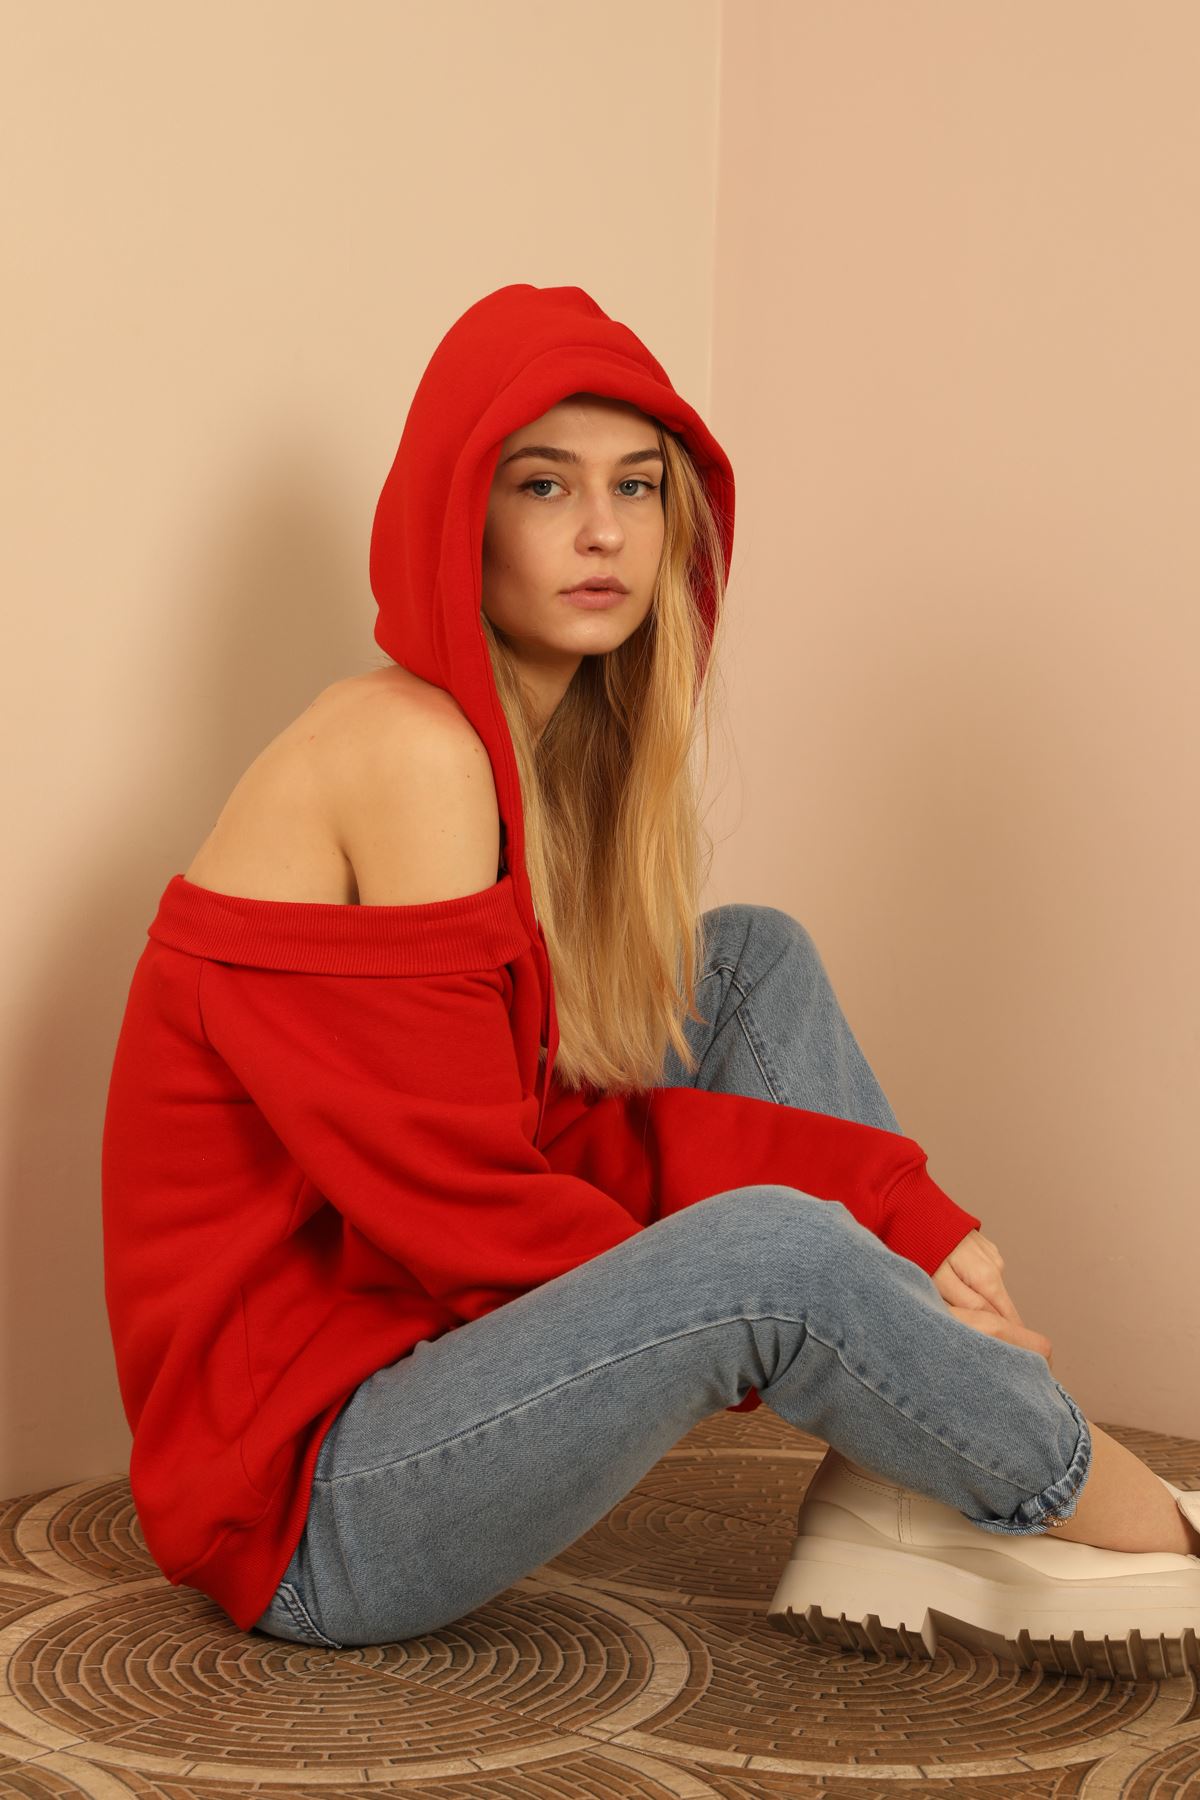 Third Knit With Wool İnside Fabric Hooded Hip Height Shoulder Detailed Women Sweatshirt - Red